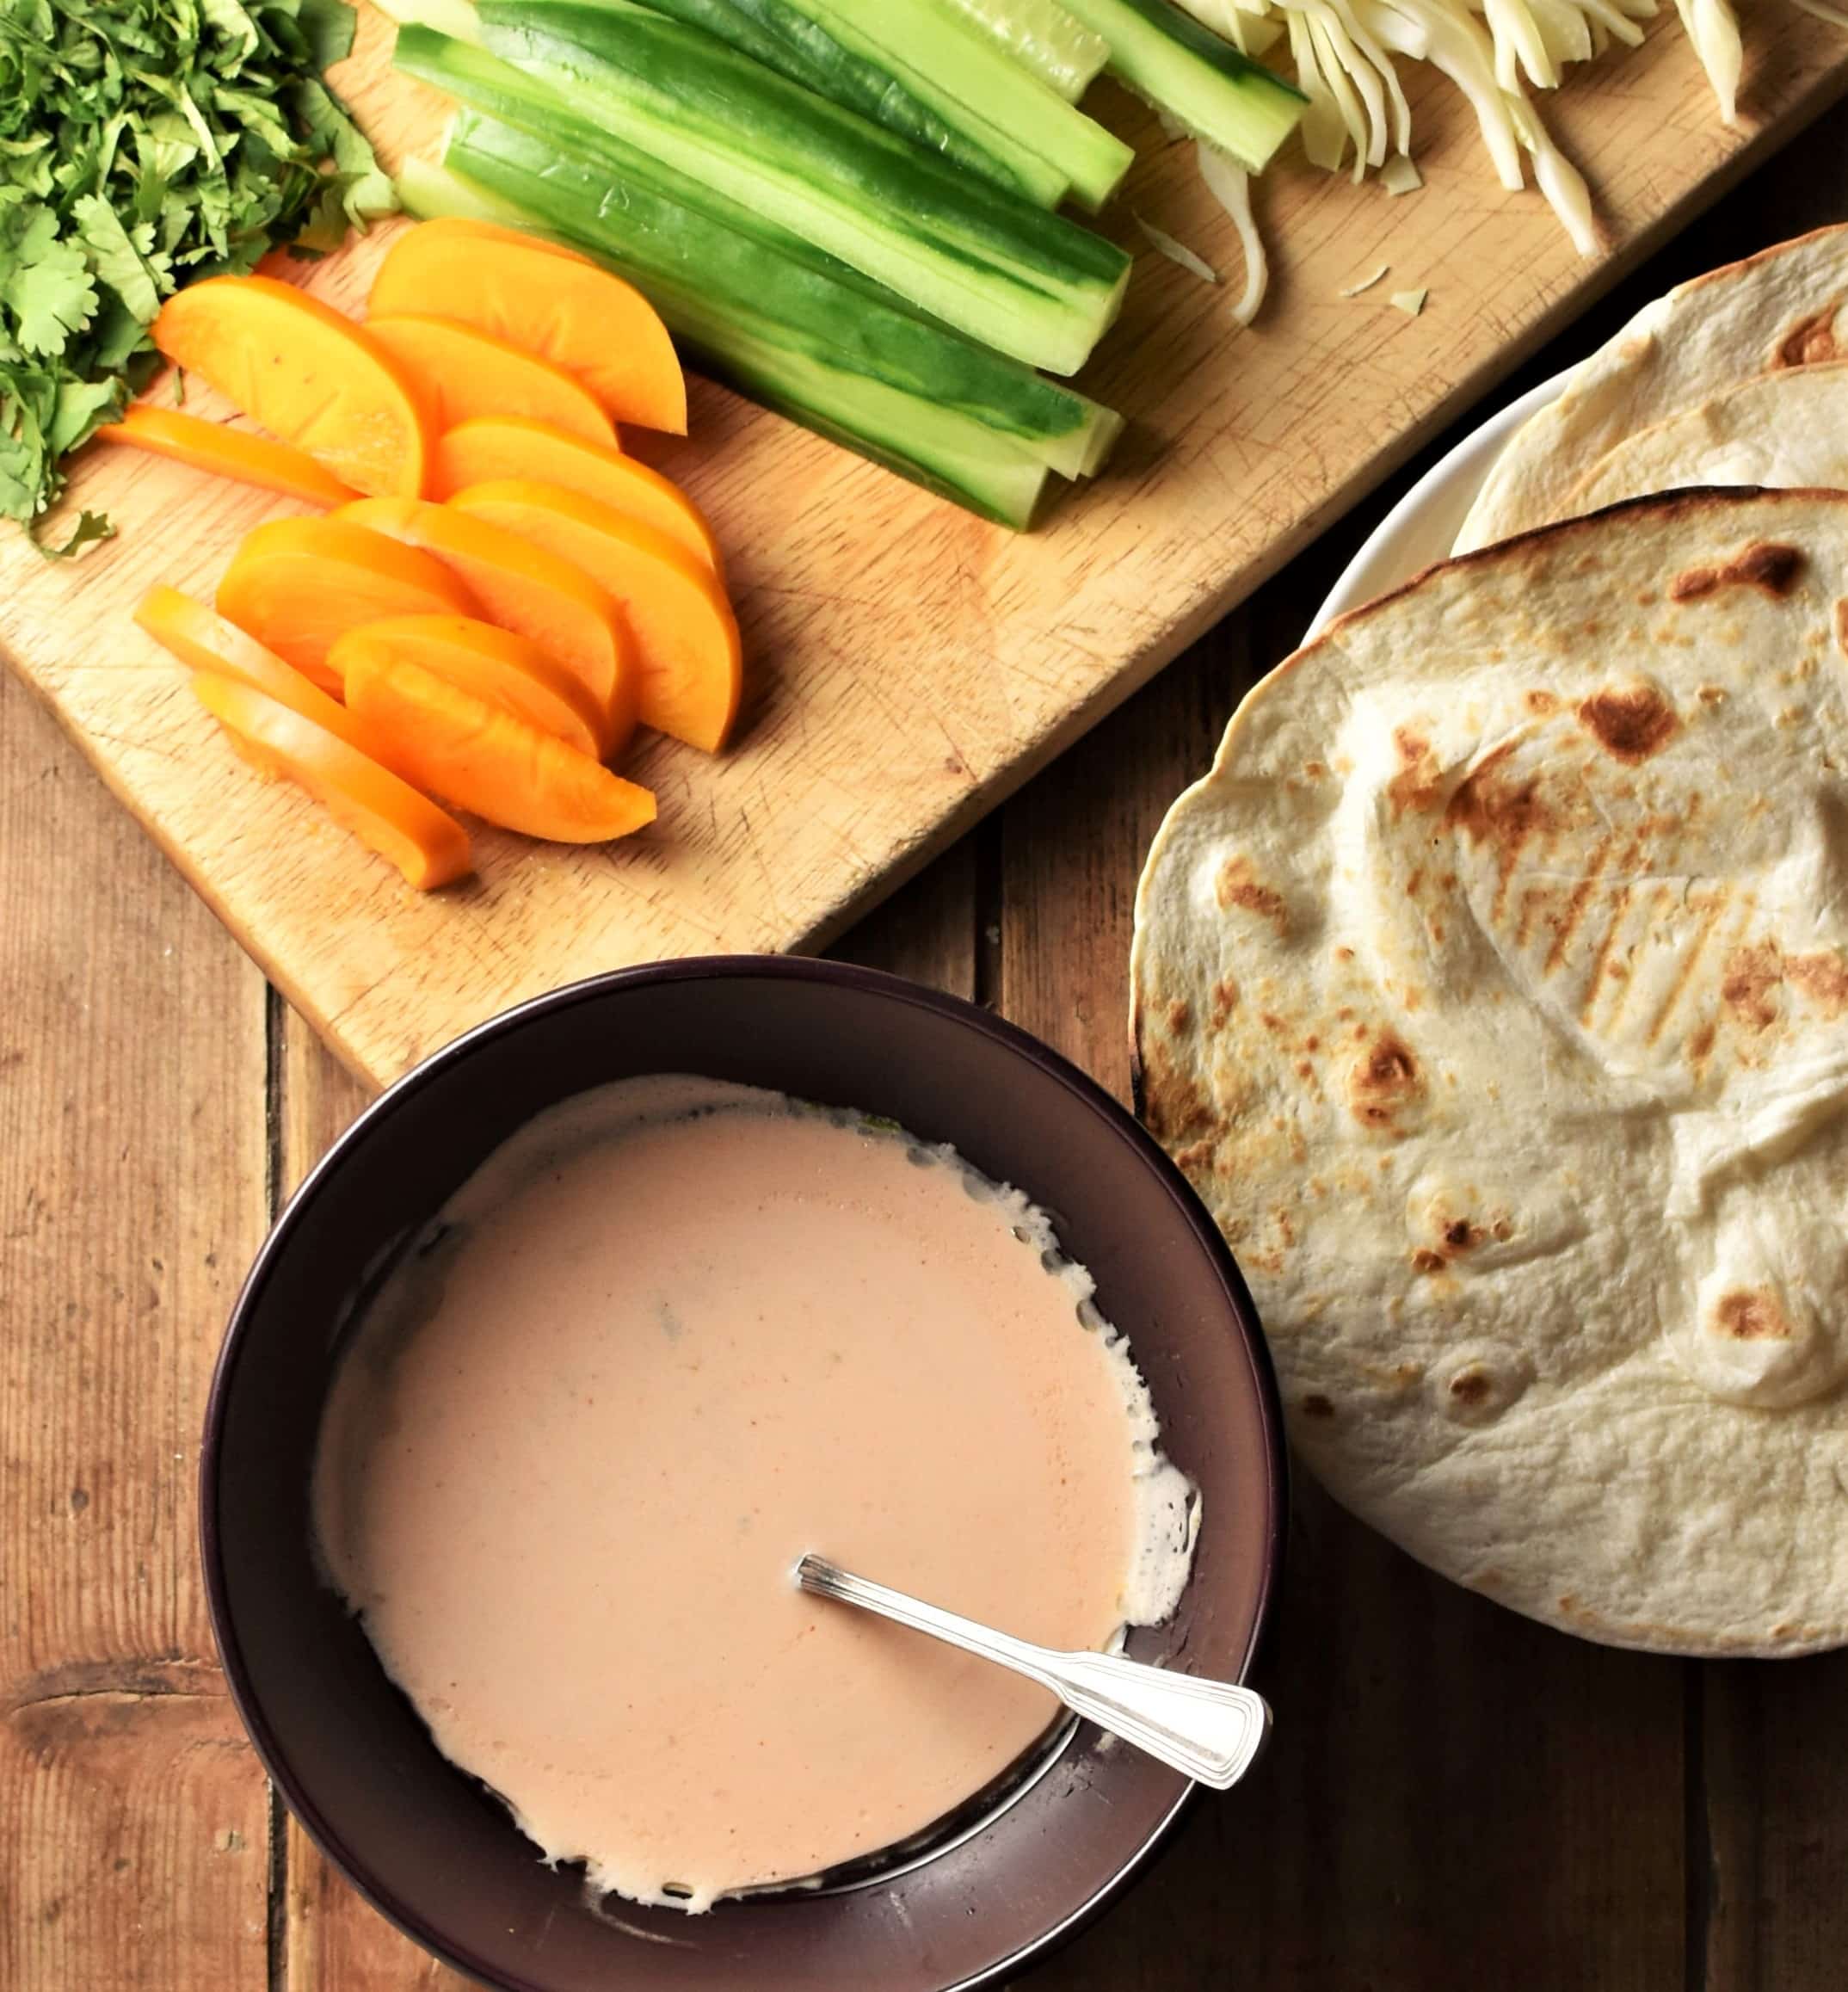 Creamy sauce, tortillas and chopped fruit and begetables on top of wooden board.